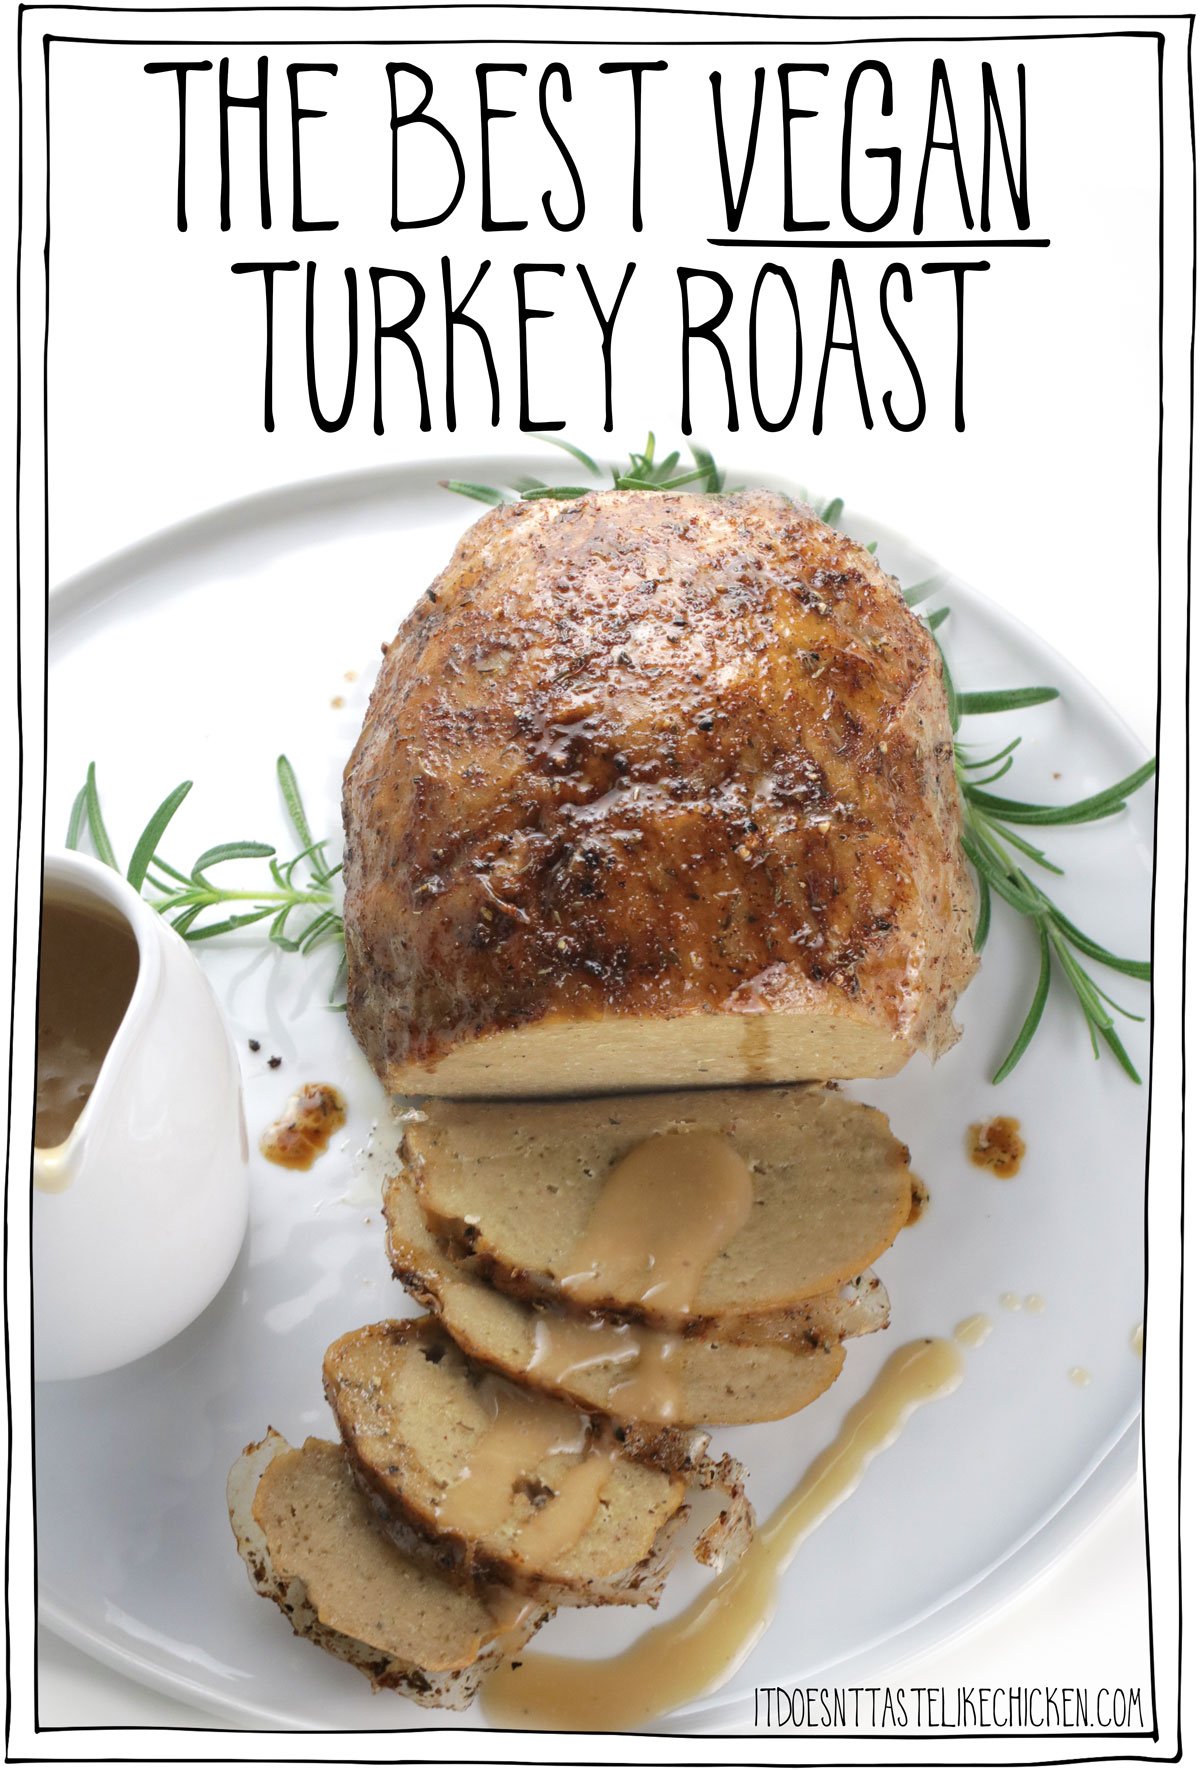 The best vegan turkey roast with crispy skin! The perfect centerpiece for Thanksgiving of a holiday meal. Easy to make, and most of it can be made ahead of time, so it's a great stress-free option. It's super meaty, tender, juicy, rich yet mild flavor, and with buttery garlic crispy skin!! You and your family will be amazed at how delicious it is! #itdoesnttastelikechicken #seitan #veganthanksgiving